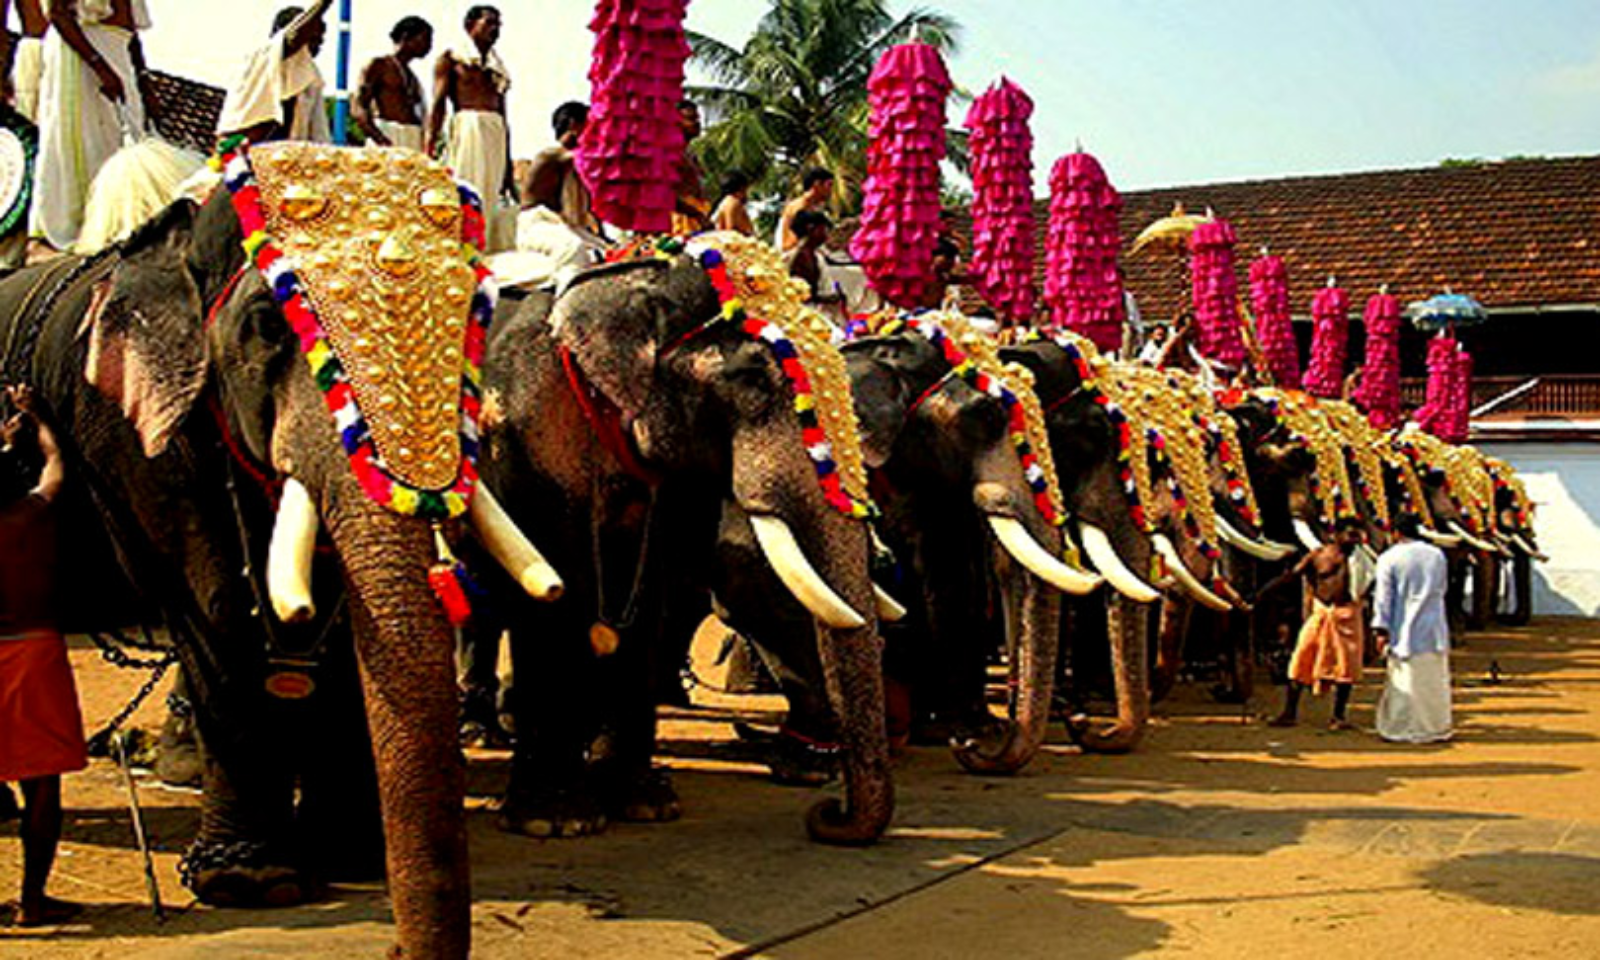 Ban Commercial Hiring And Leasing Of Elephants, Suggests Amicus ...